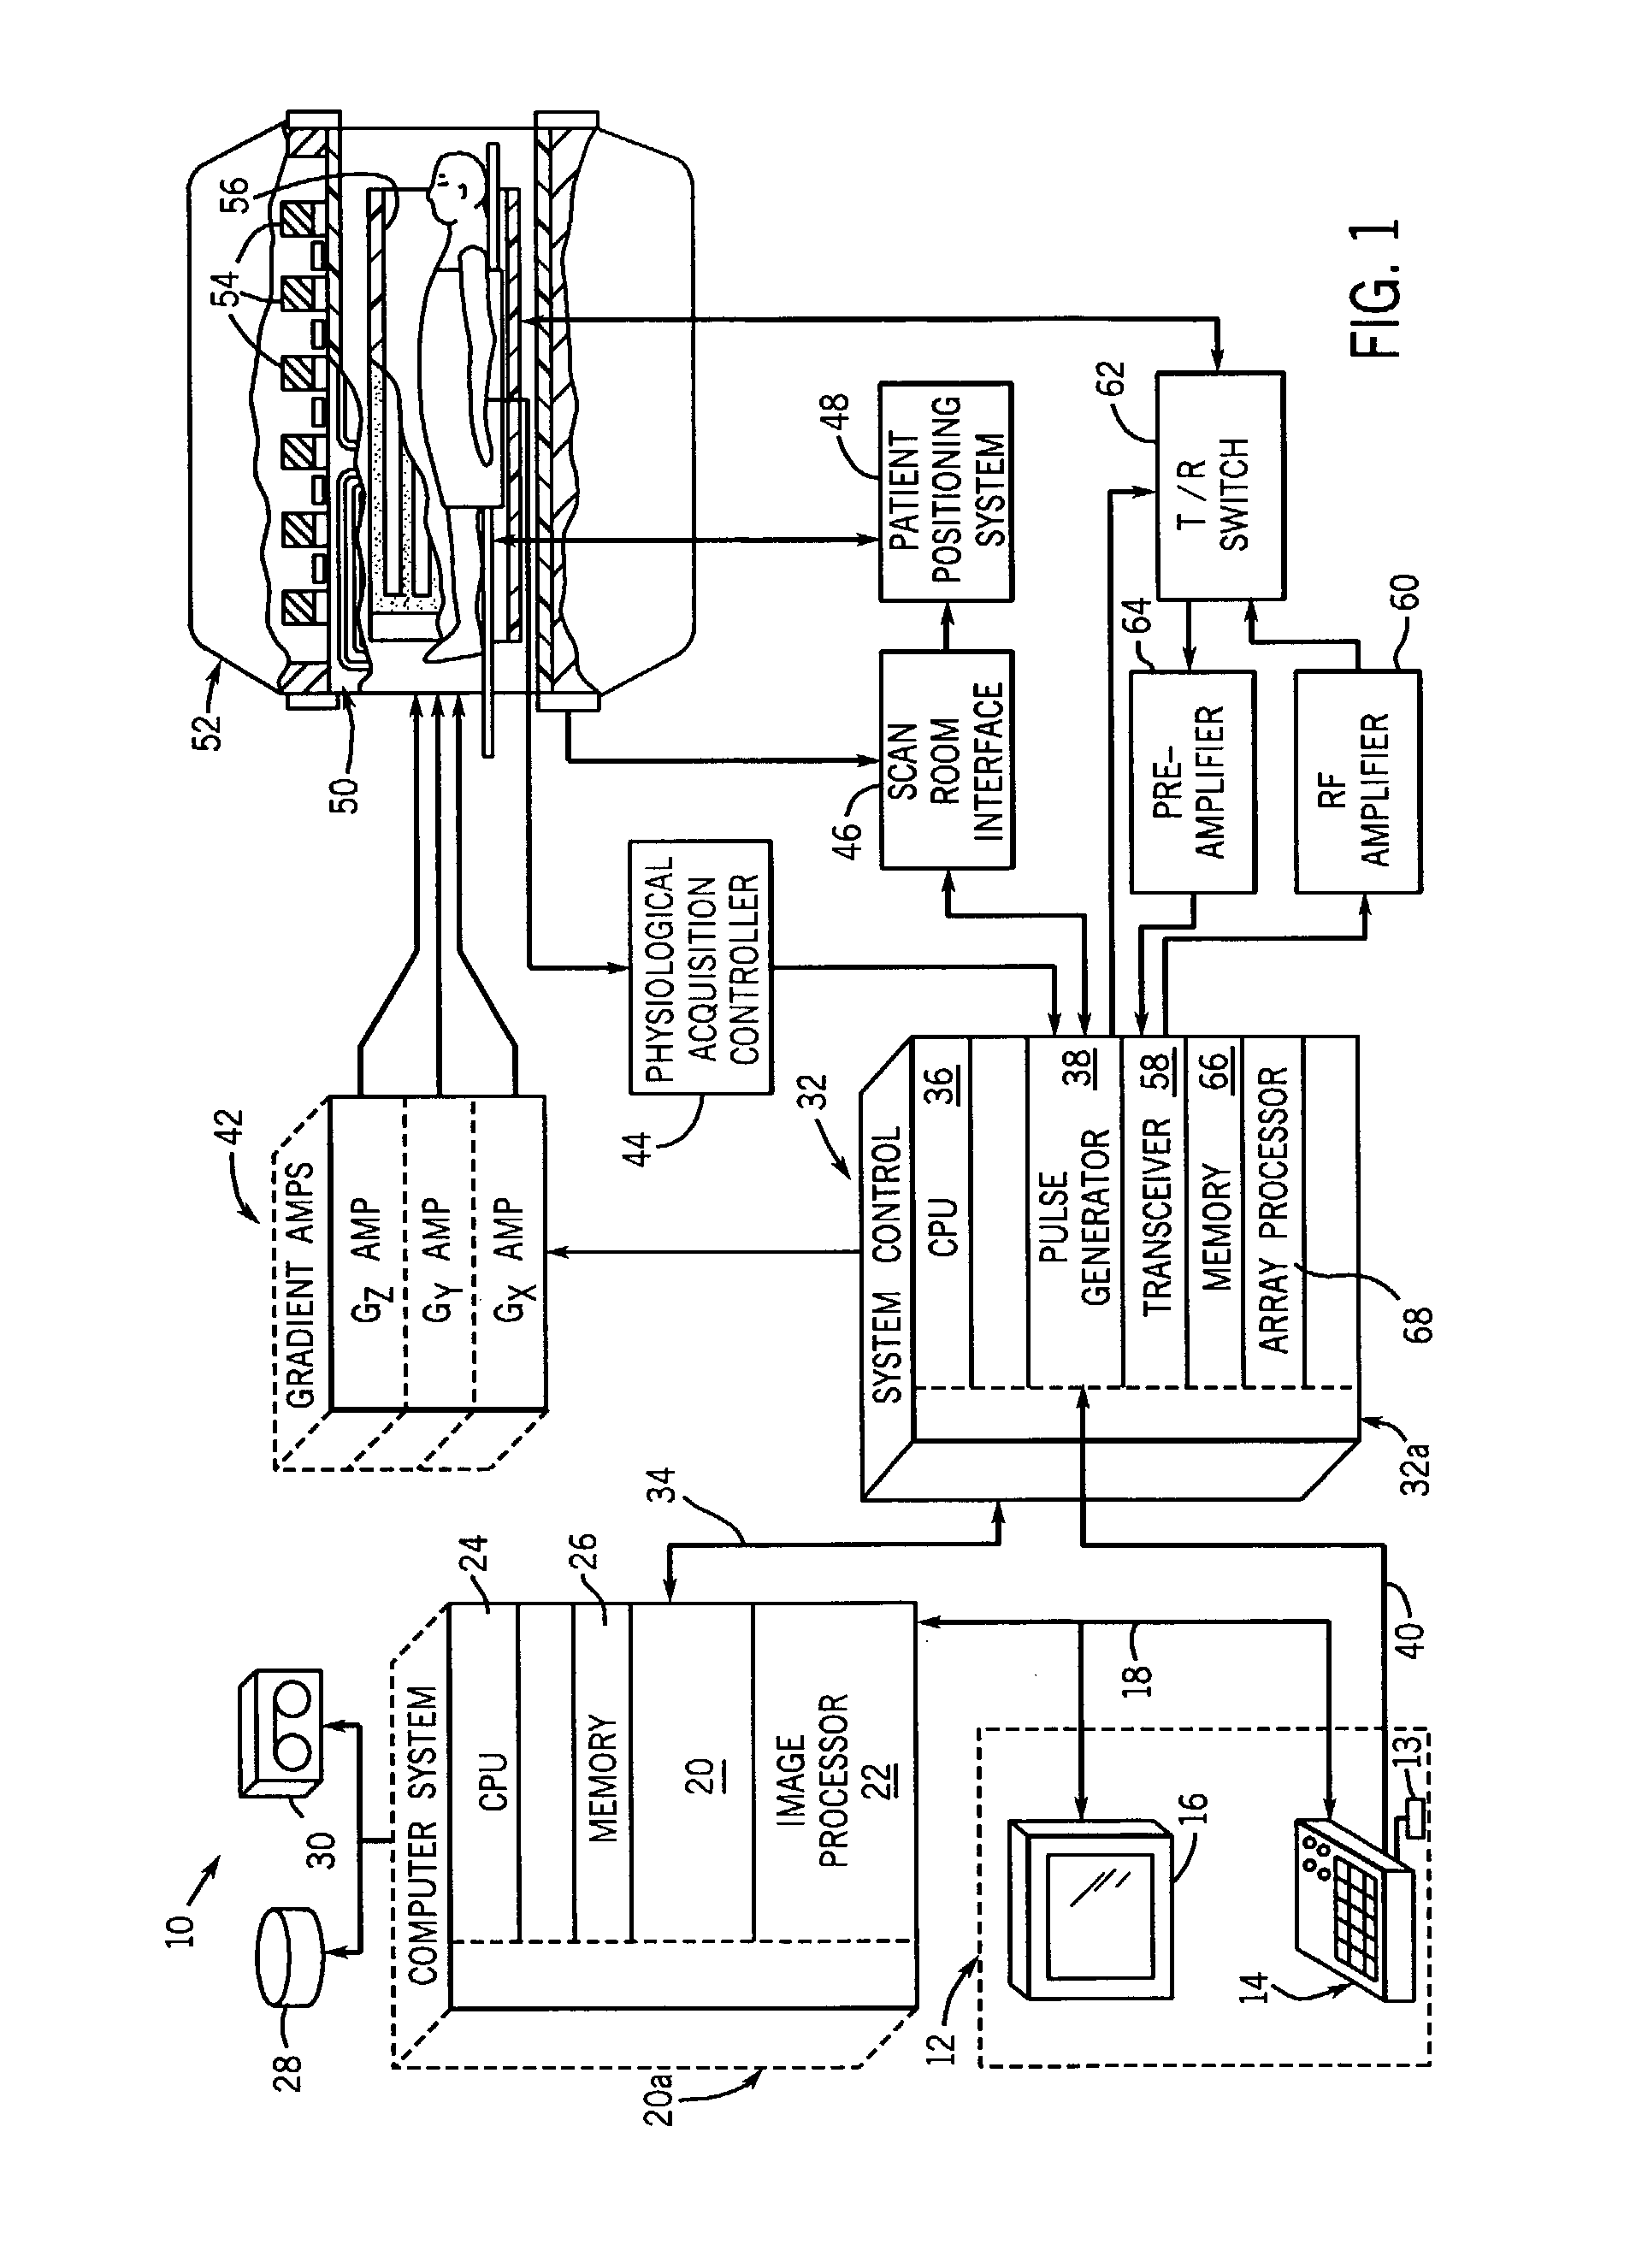 Method and apparatus for breath-held MR data acquisition using interleaved acquisition